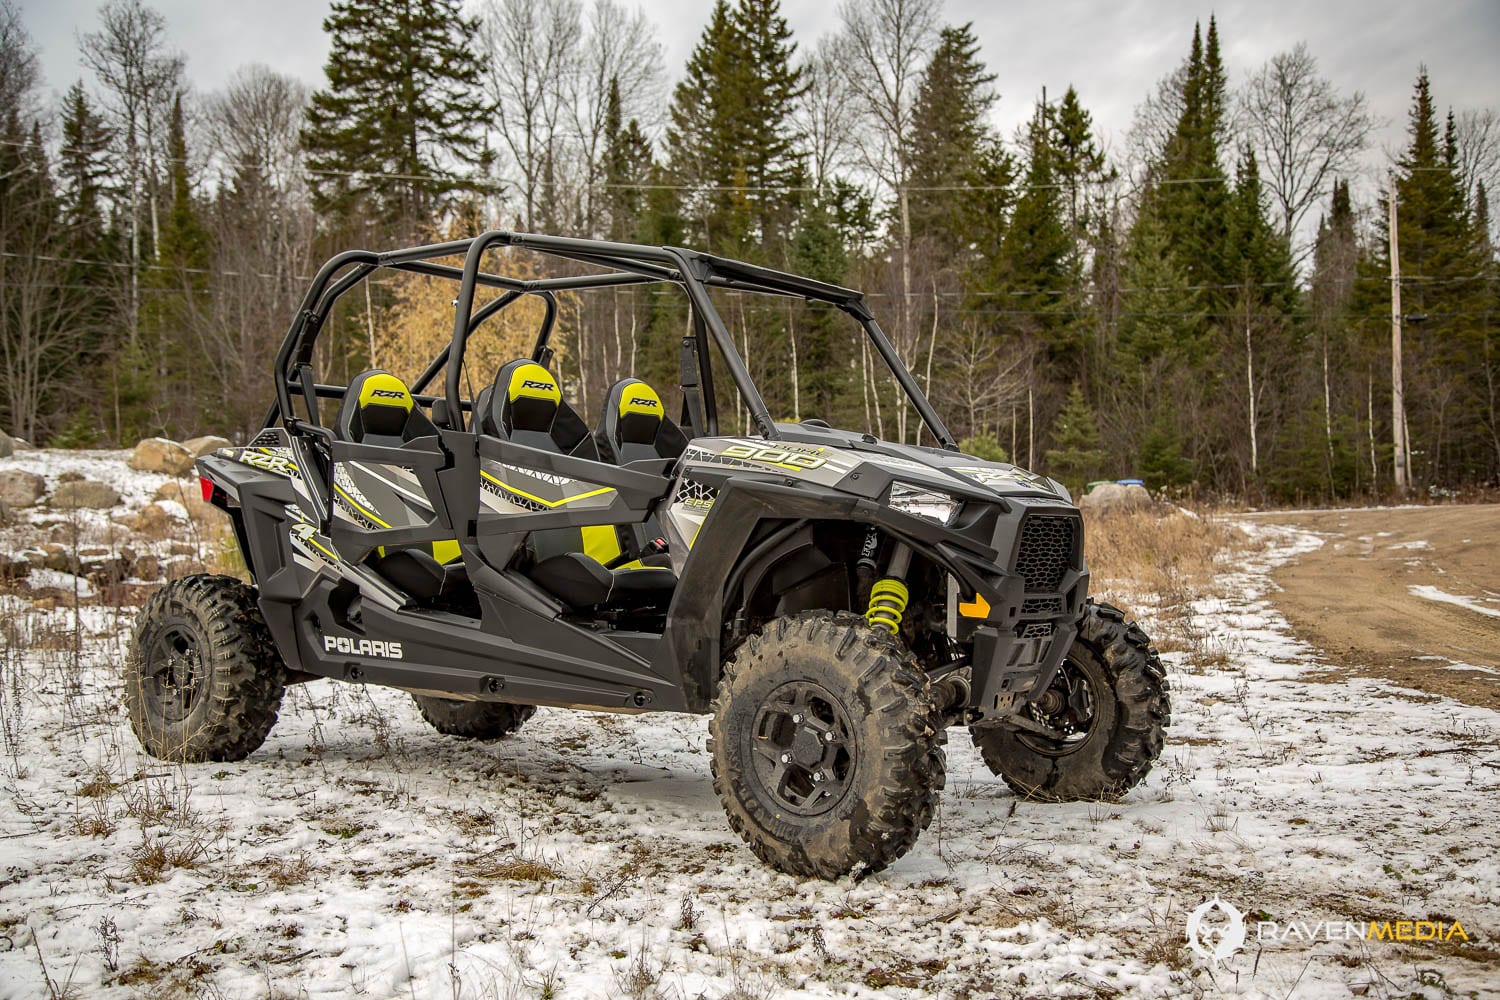 Need Extra Power for Your Dynacraft Realtree UTV. Try These 10 Simple Upgrades